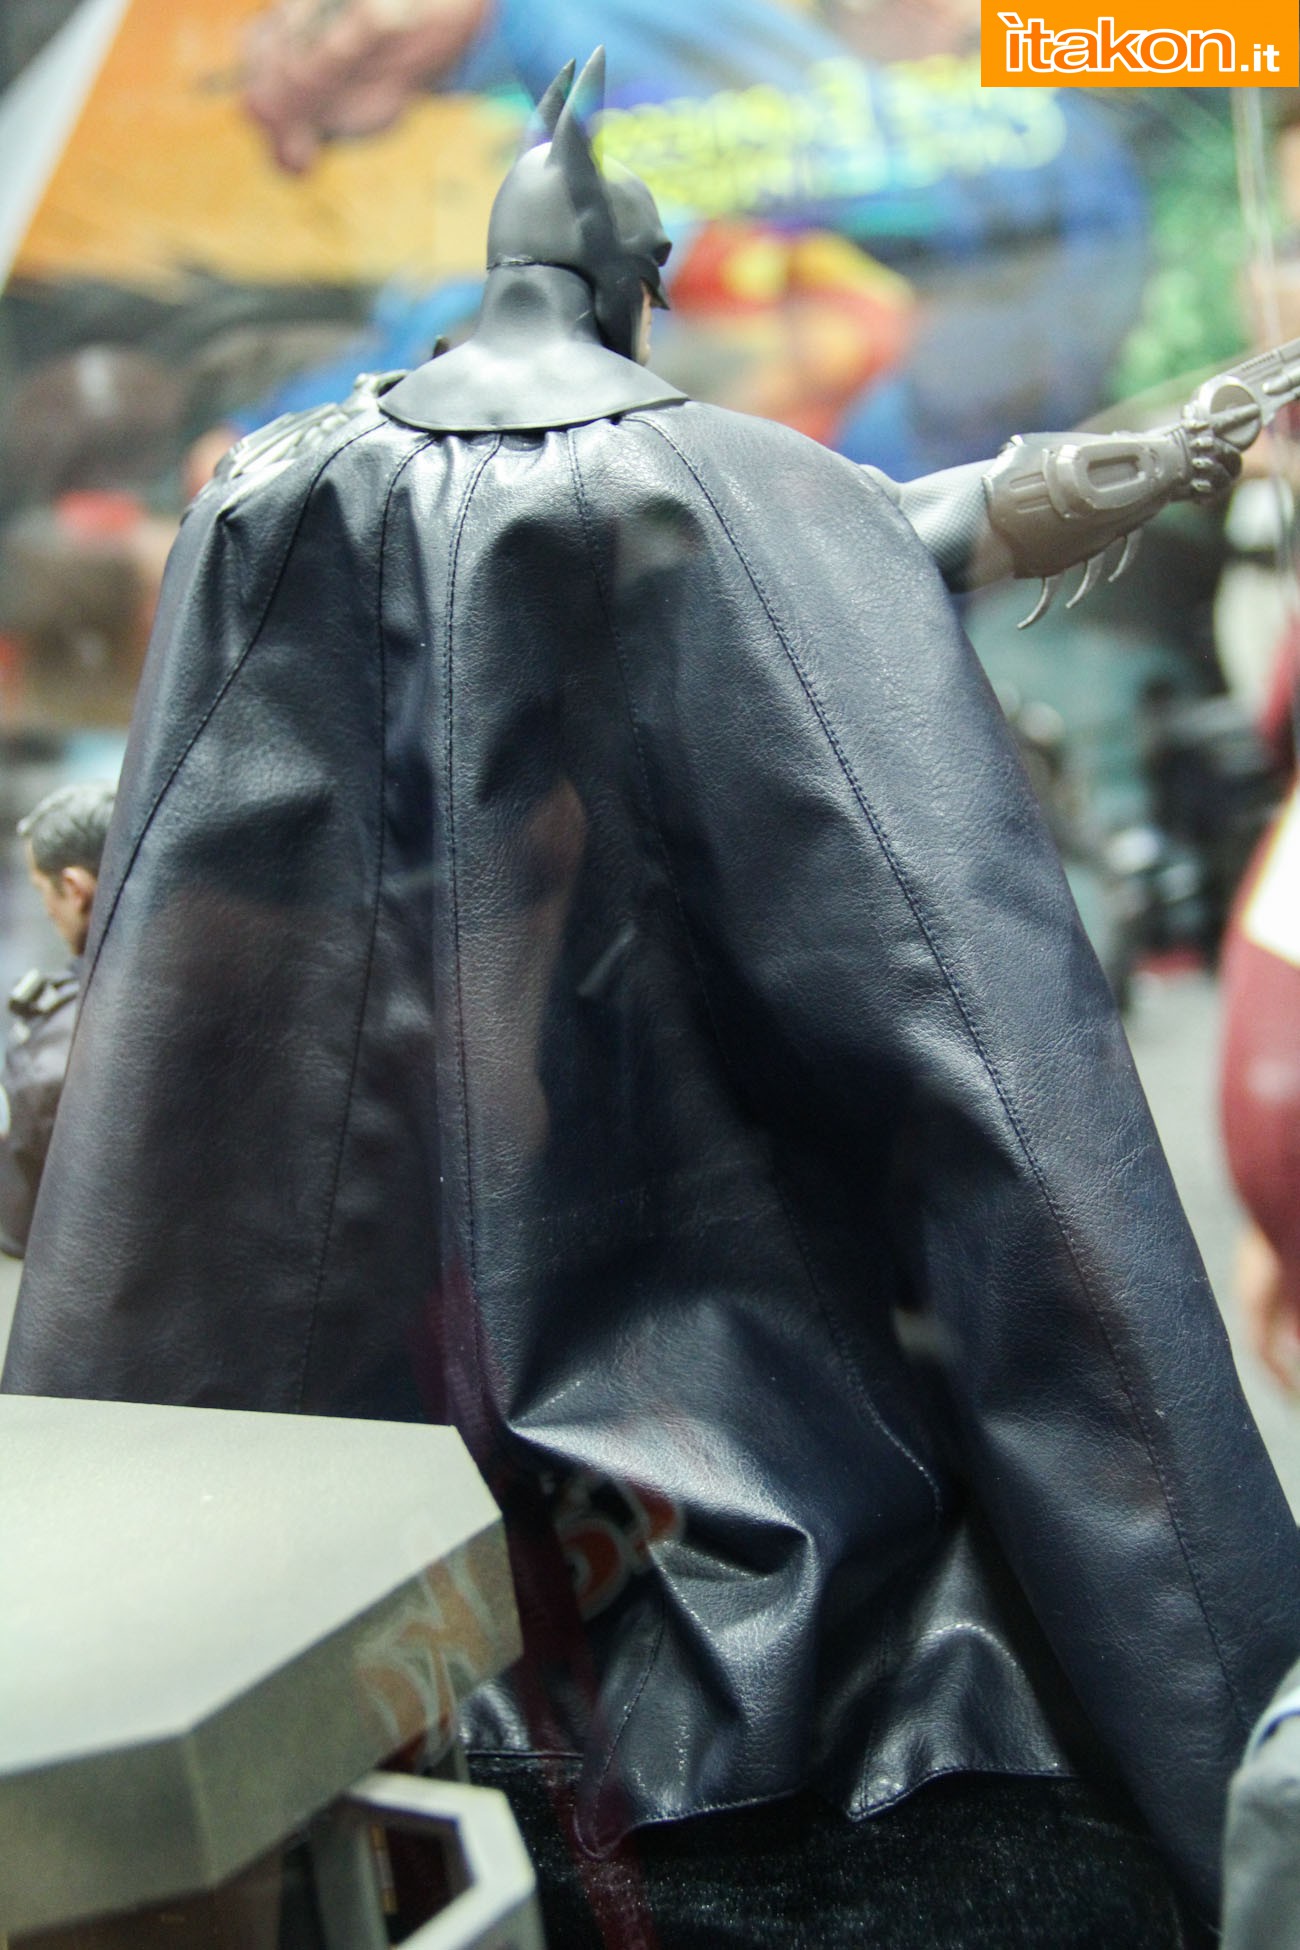 sdcc2014-hot-toys-booth-88.jpg